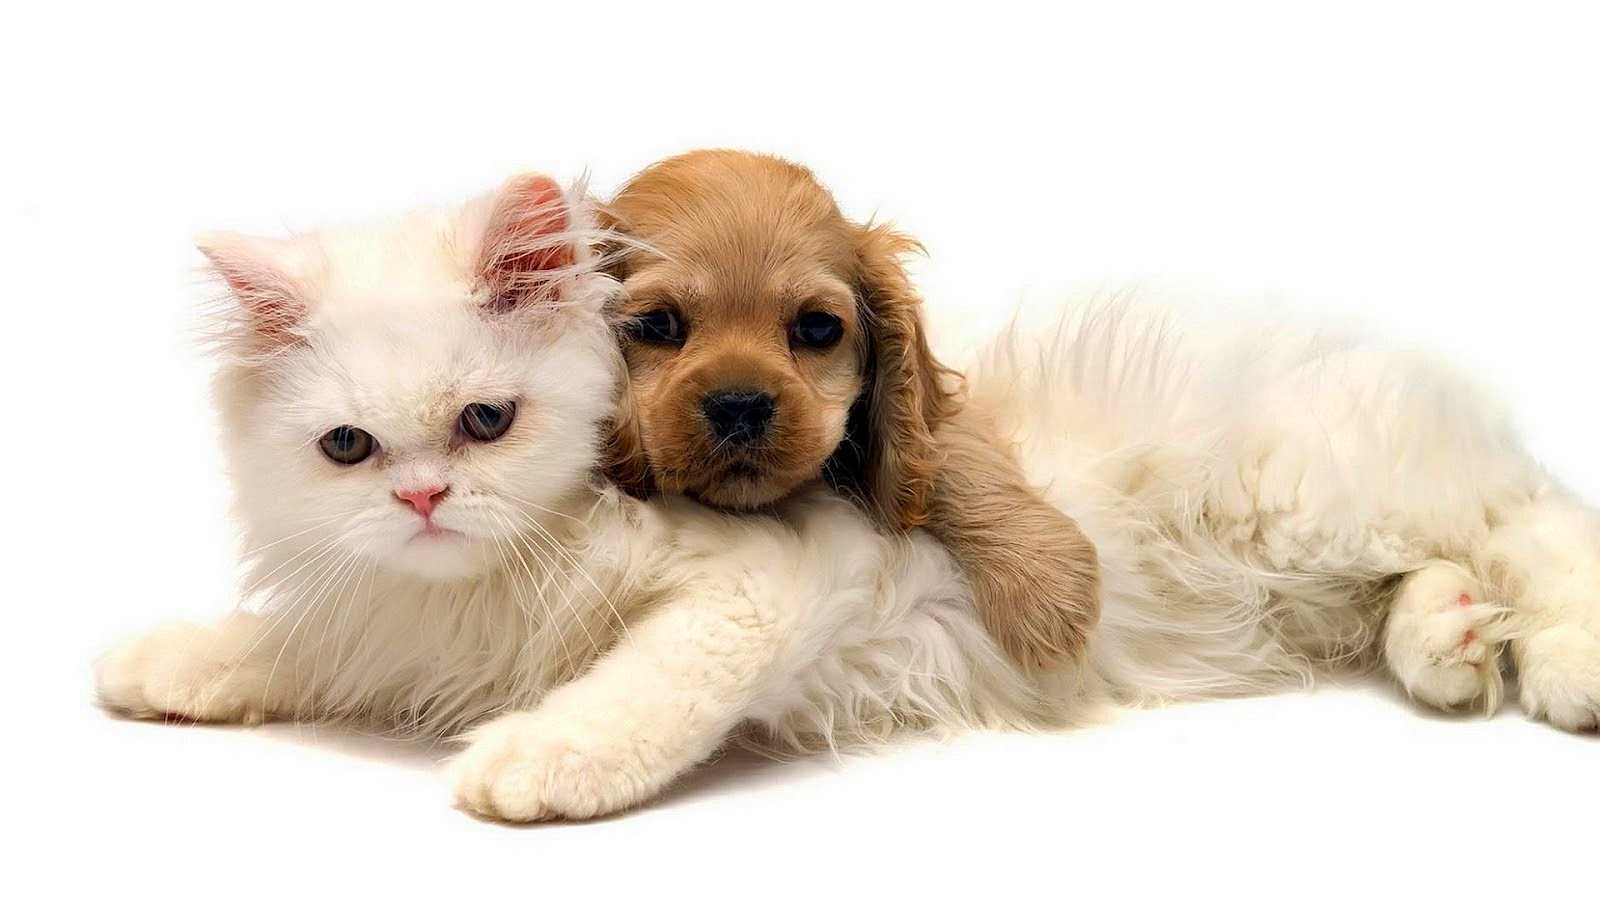 HD Animal Wallpaper Of A Cat And Dog Cuddling